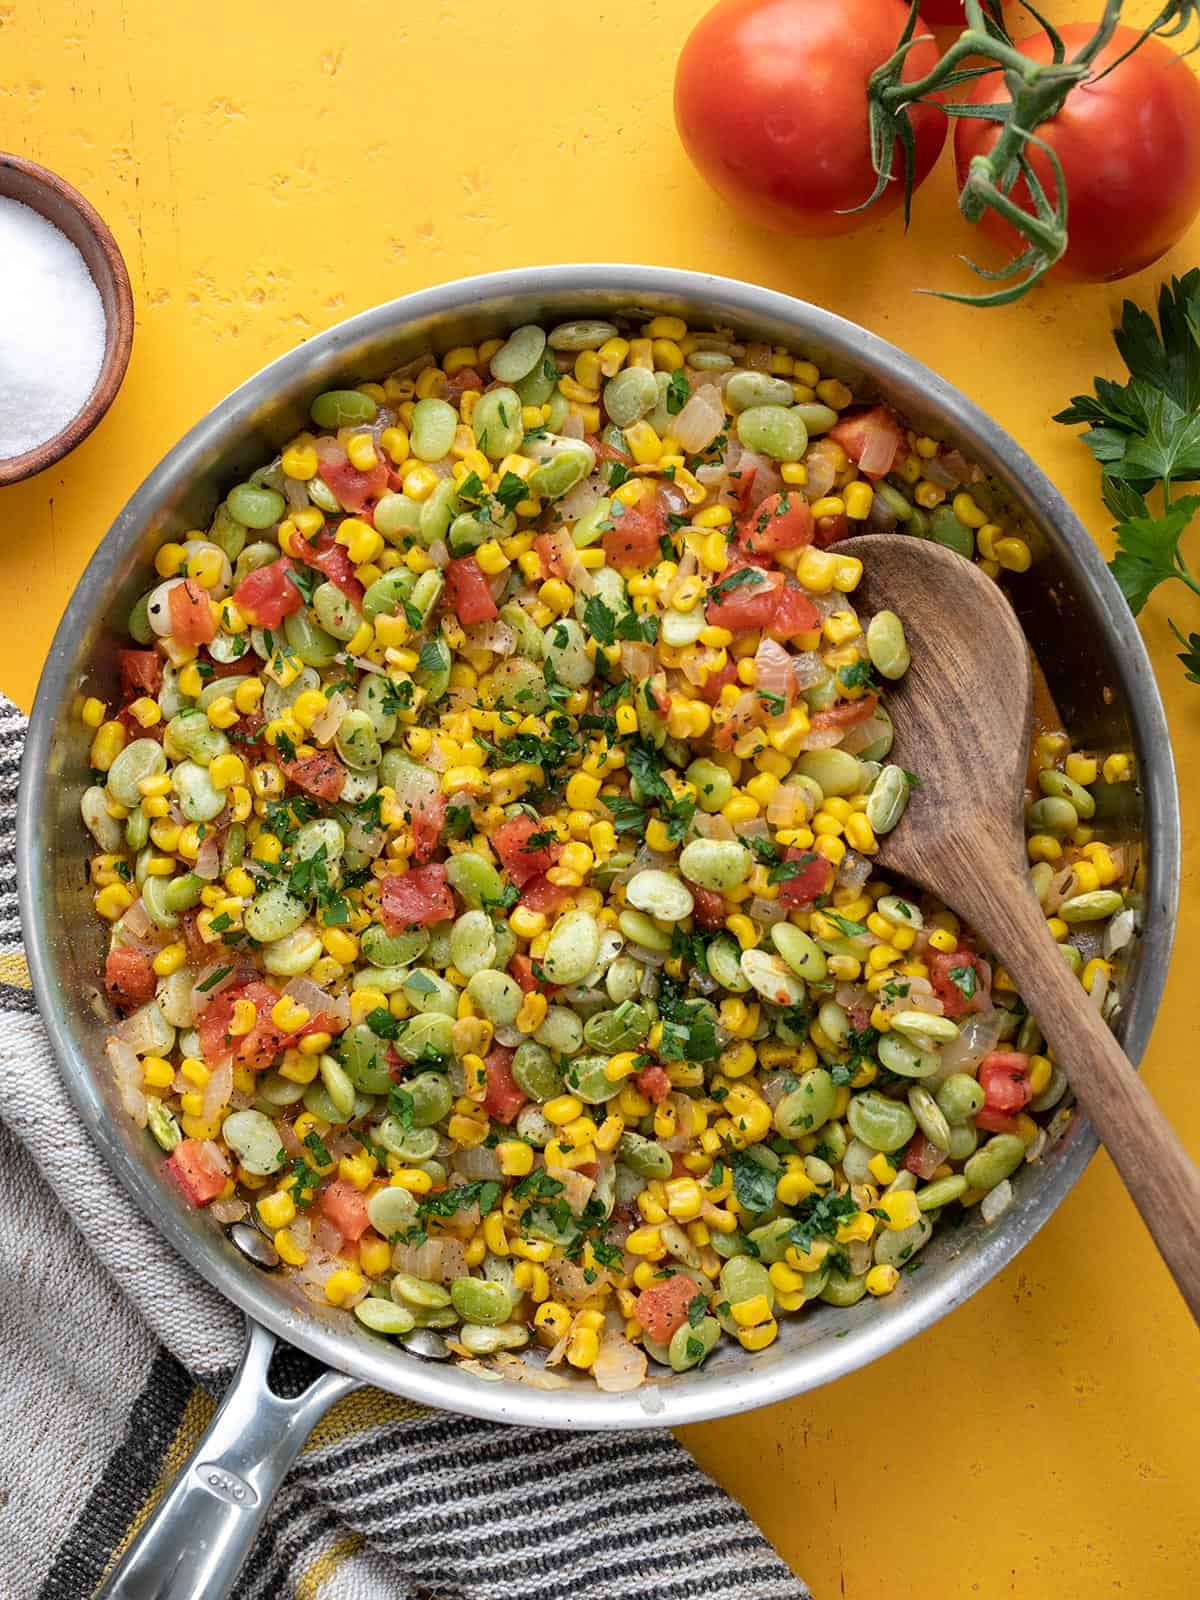 Succotash in a skillet with a wooden spoon, garnished with parsley.